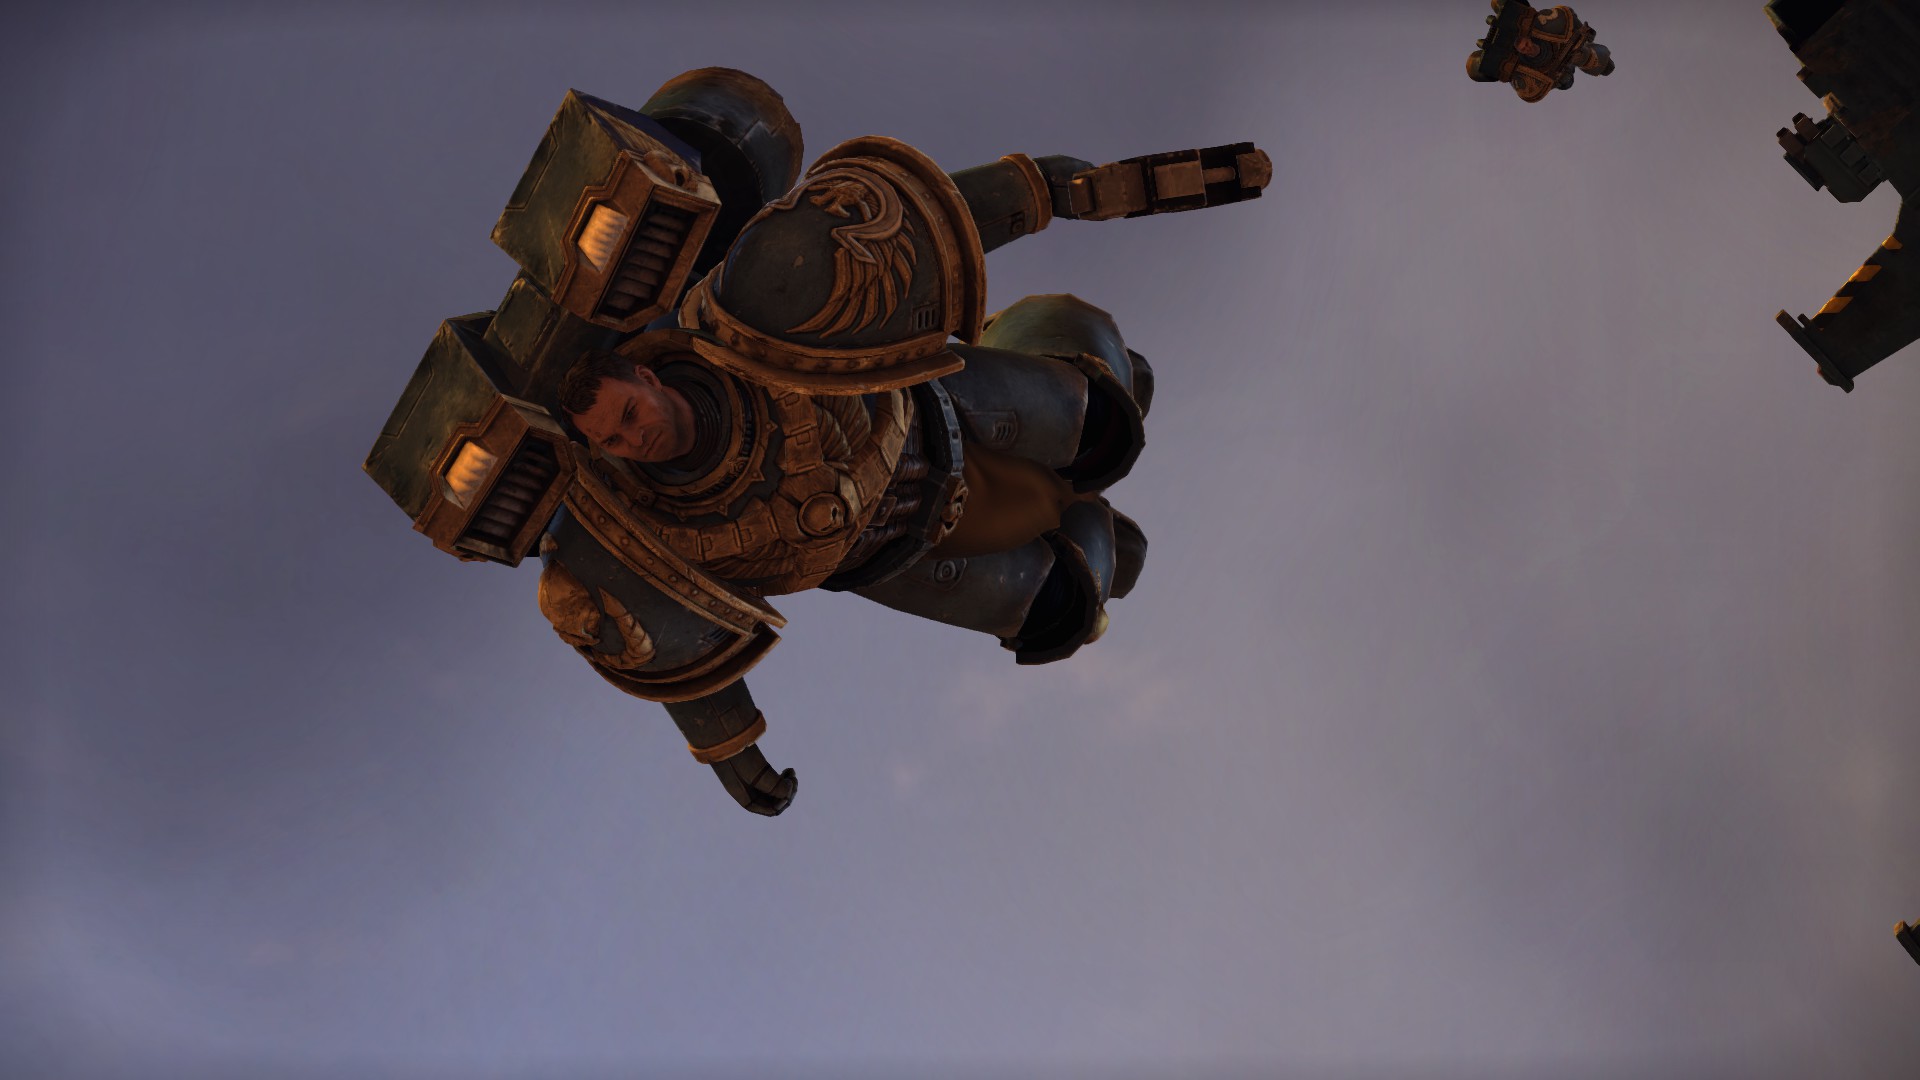 Space marines with jetpacks leap out of their craft like badasses